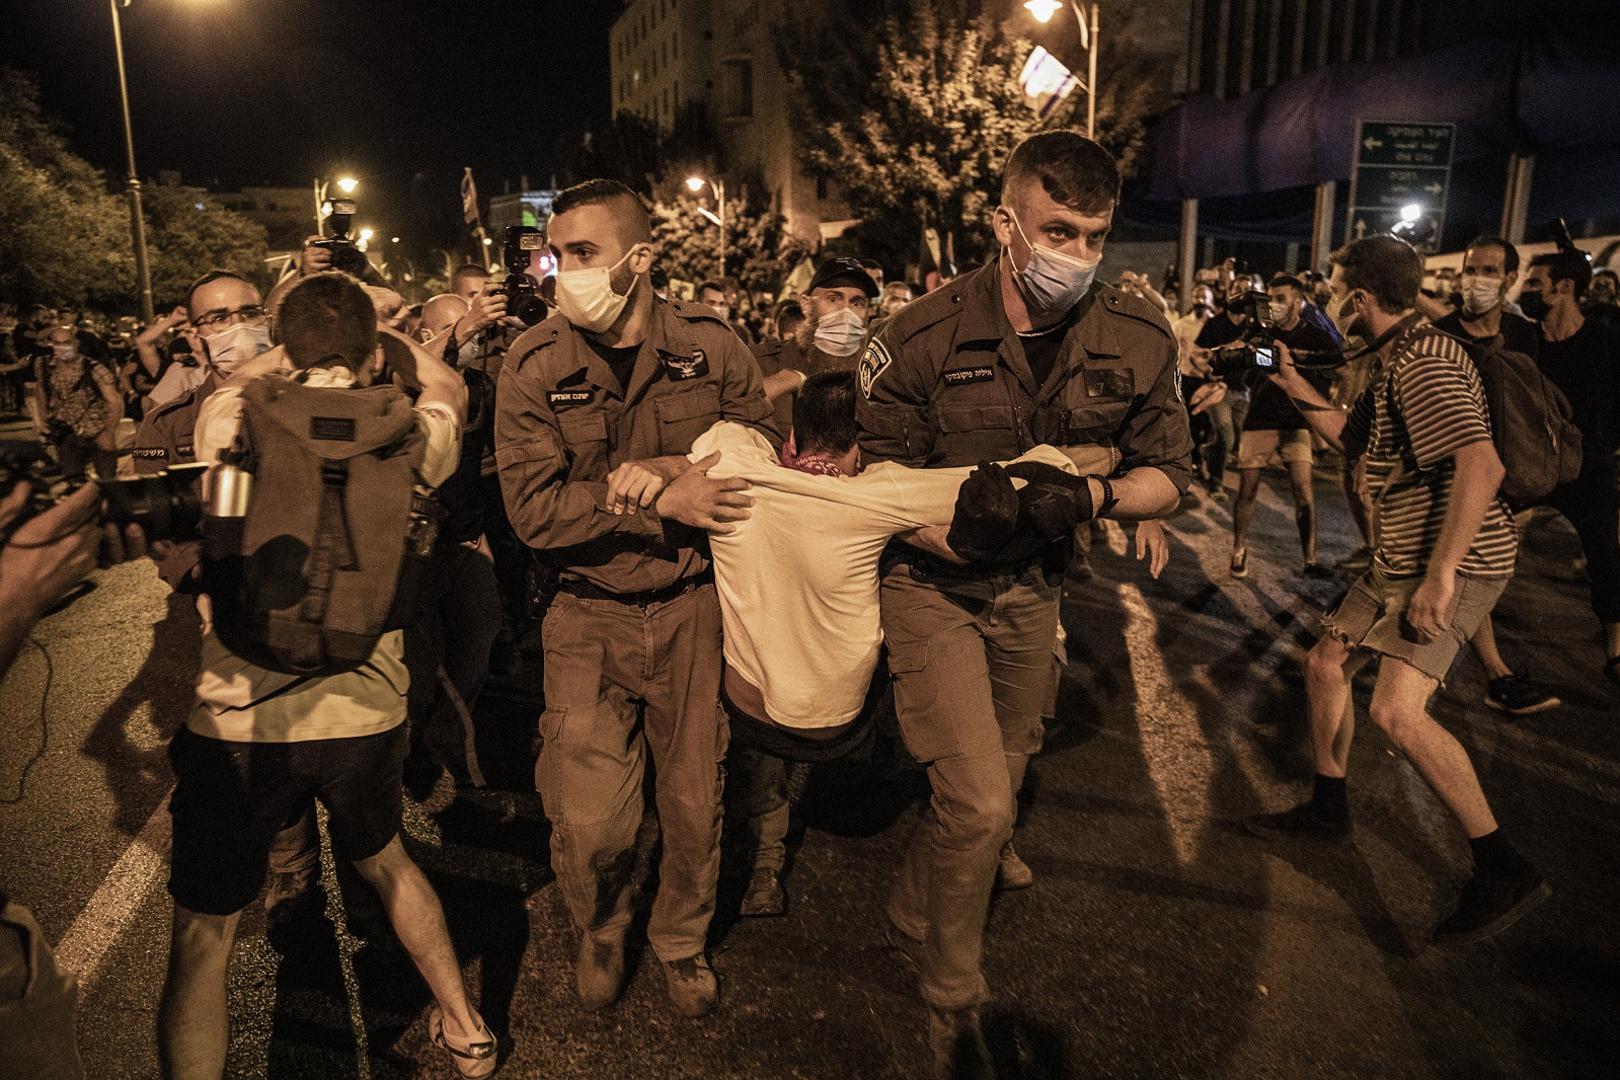 21 September 2020, Israel, Jerusalem: Israeli policemen arrest a protester during an anti-government demonstration against corruption outside the residence of Israeli Prime Minister Benjamin Netanyahu. Photo: Ilia Yefimovich/dpa /DPA/PIXSELL